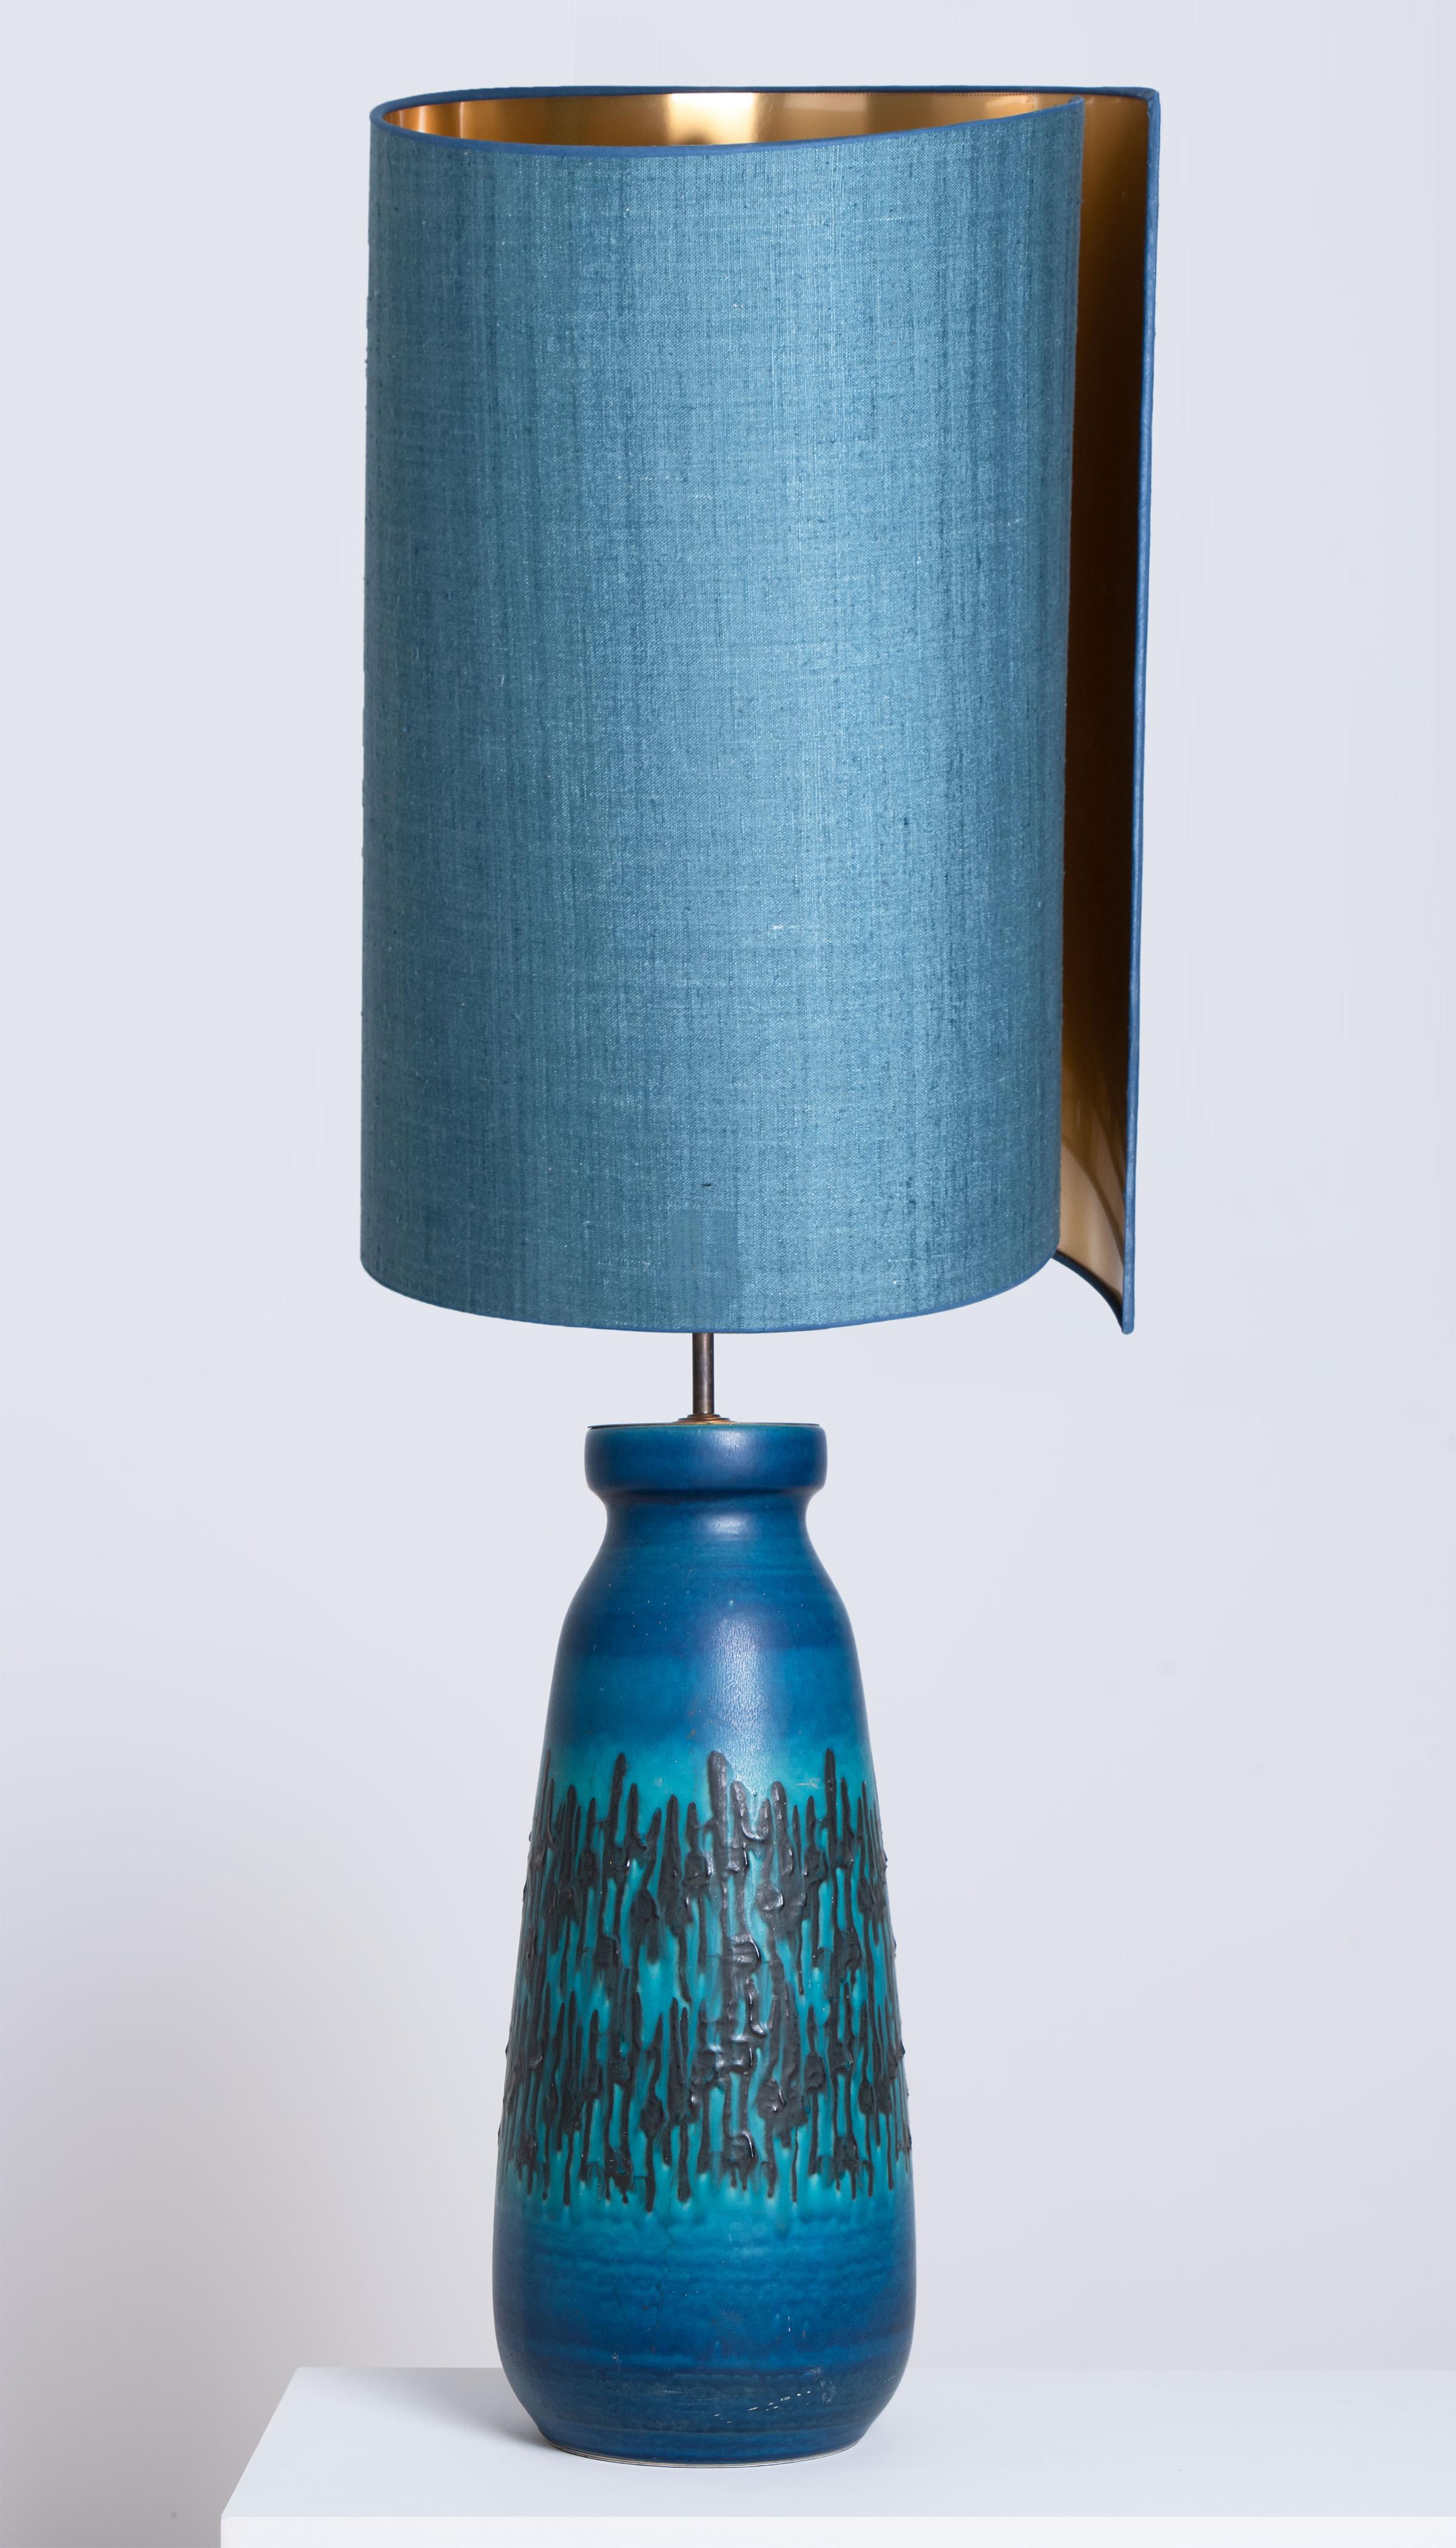 A rare large ceramic lamp, Denmark, 1960s. A sculptural high-end piece made of handmade ceramic in blue and grey tones. With a new matching custom made blue silk lamp shade by René Houben. With warm gold inner-shade. 

The lamp is in good vintage